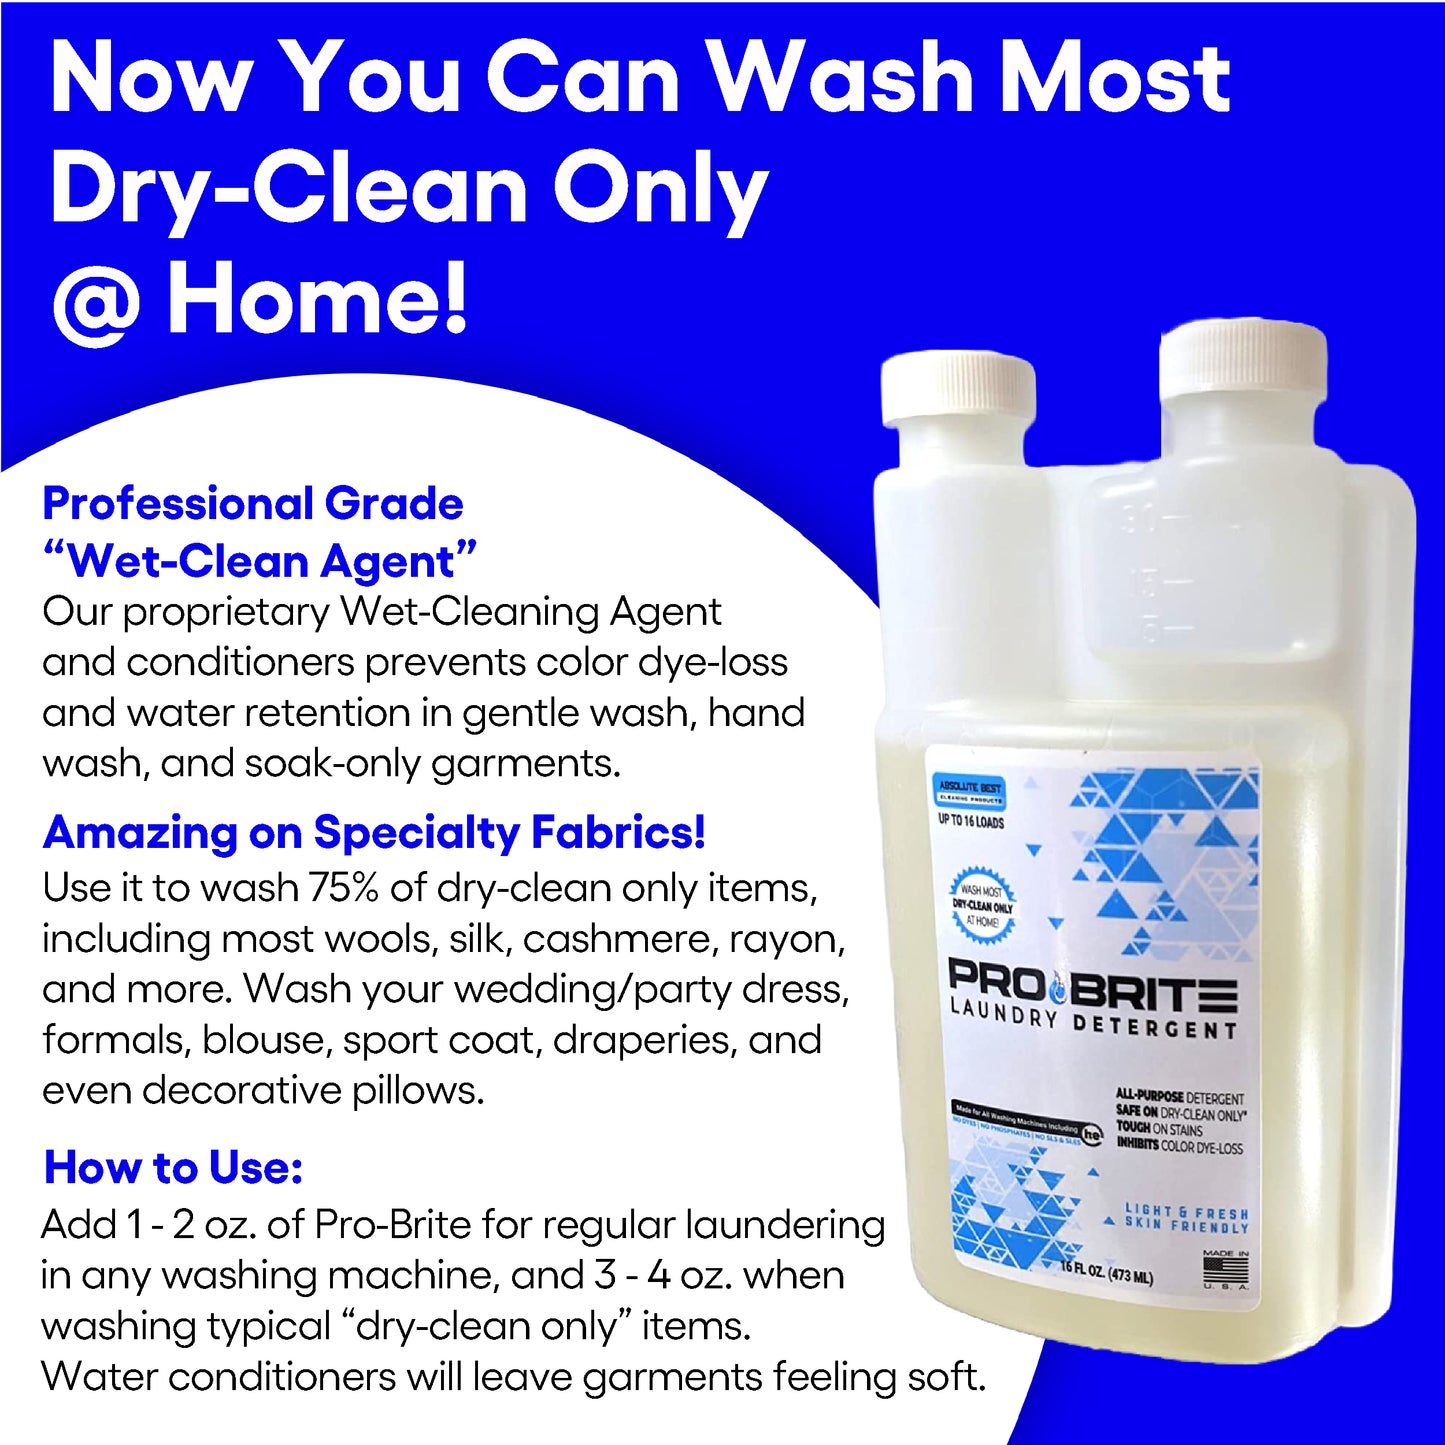 Pro-Brite Specialty Detergent for Dry-Clean Only Fabrics - Now Wash Right at Home